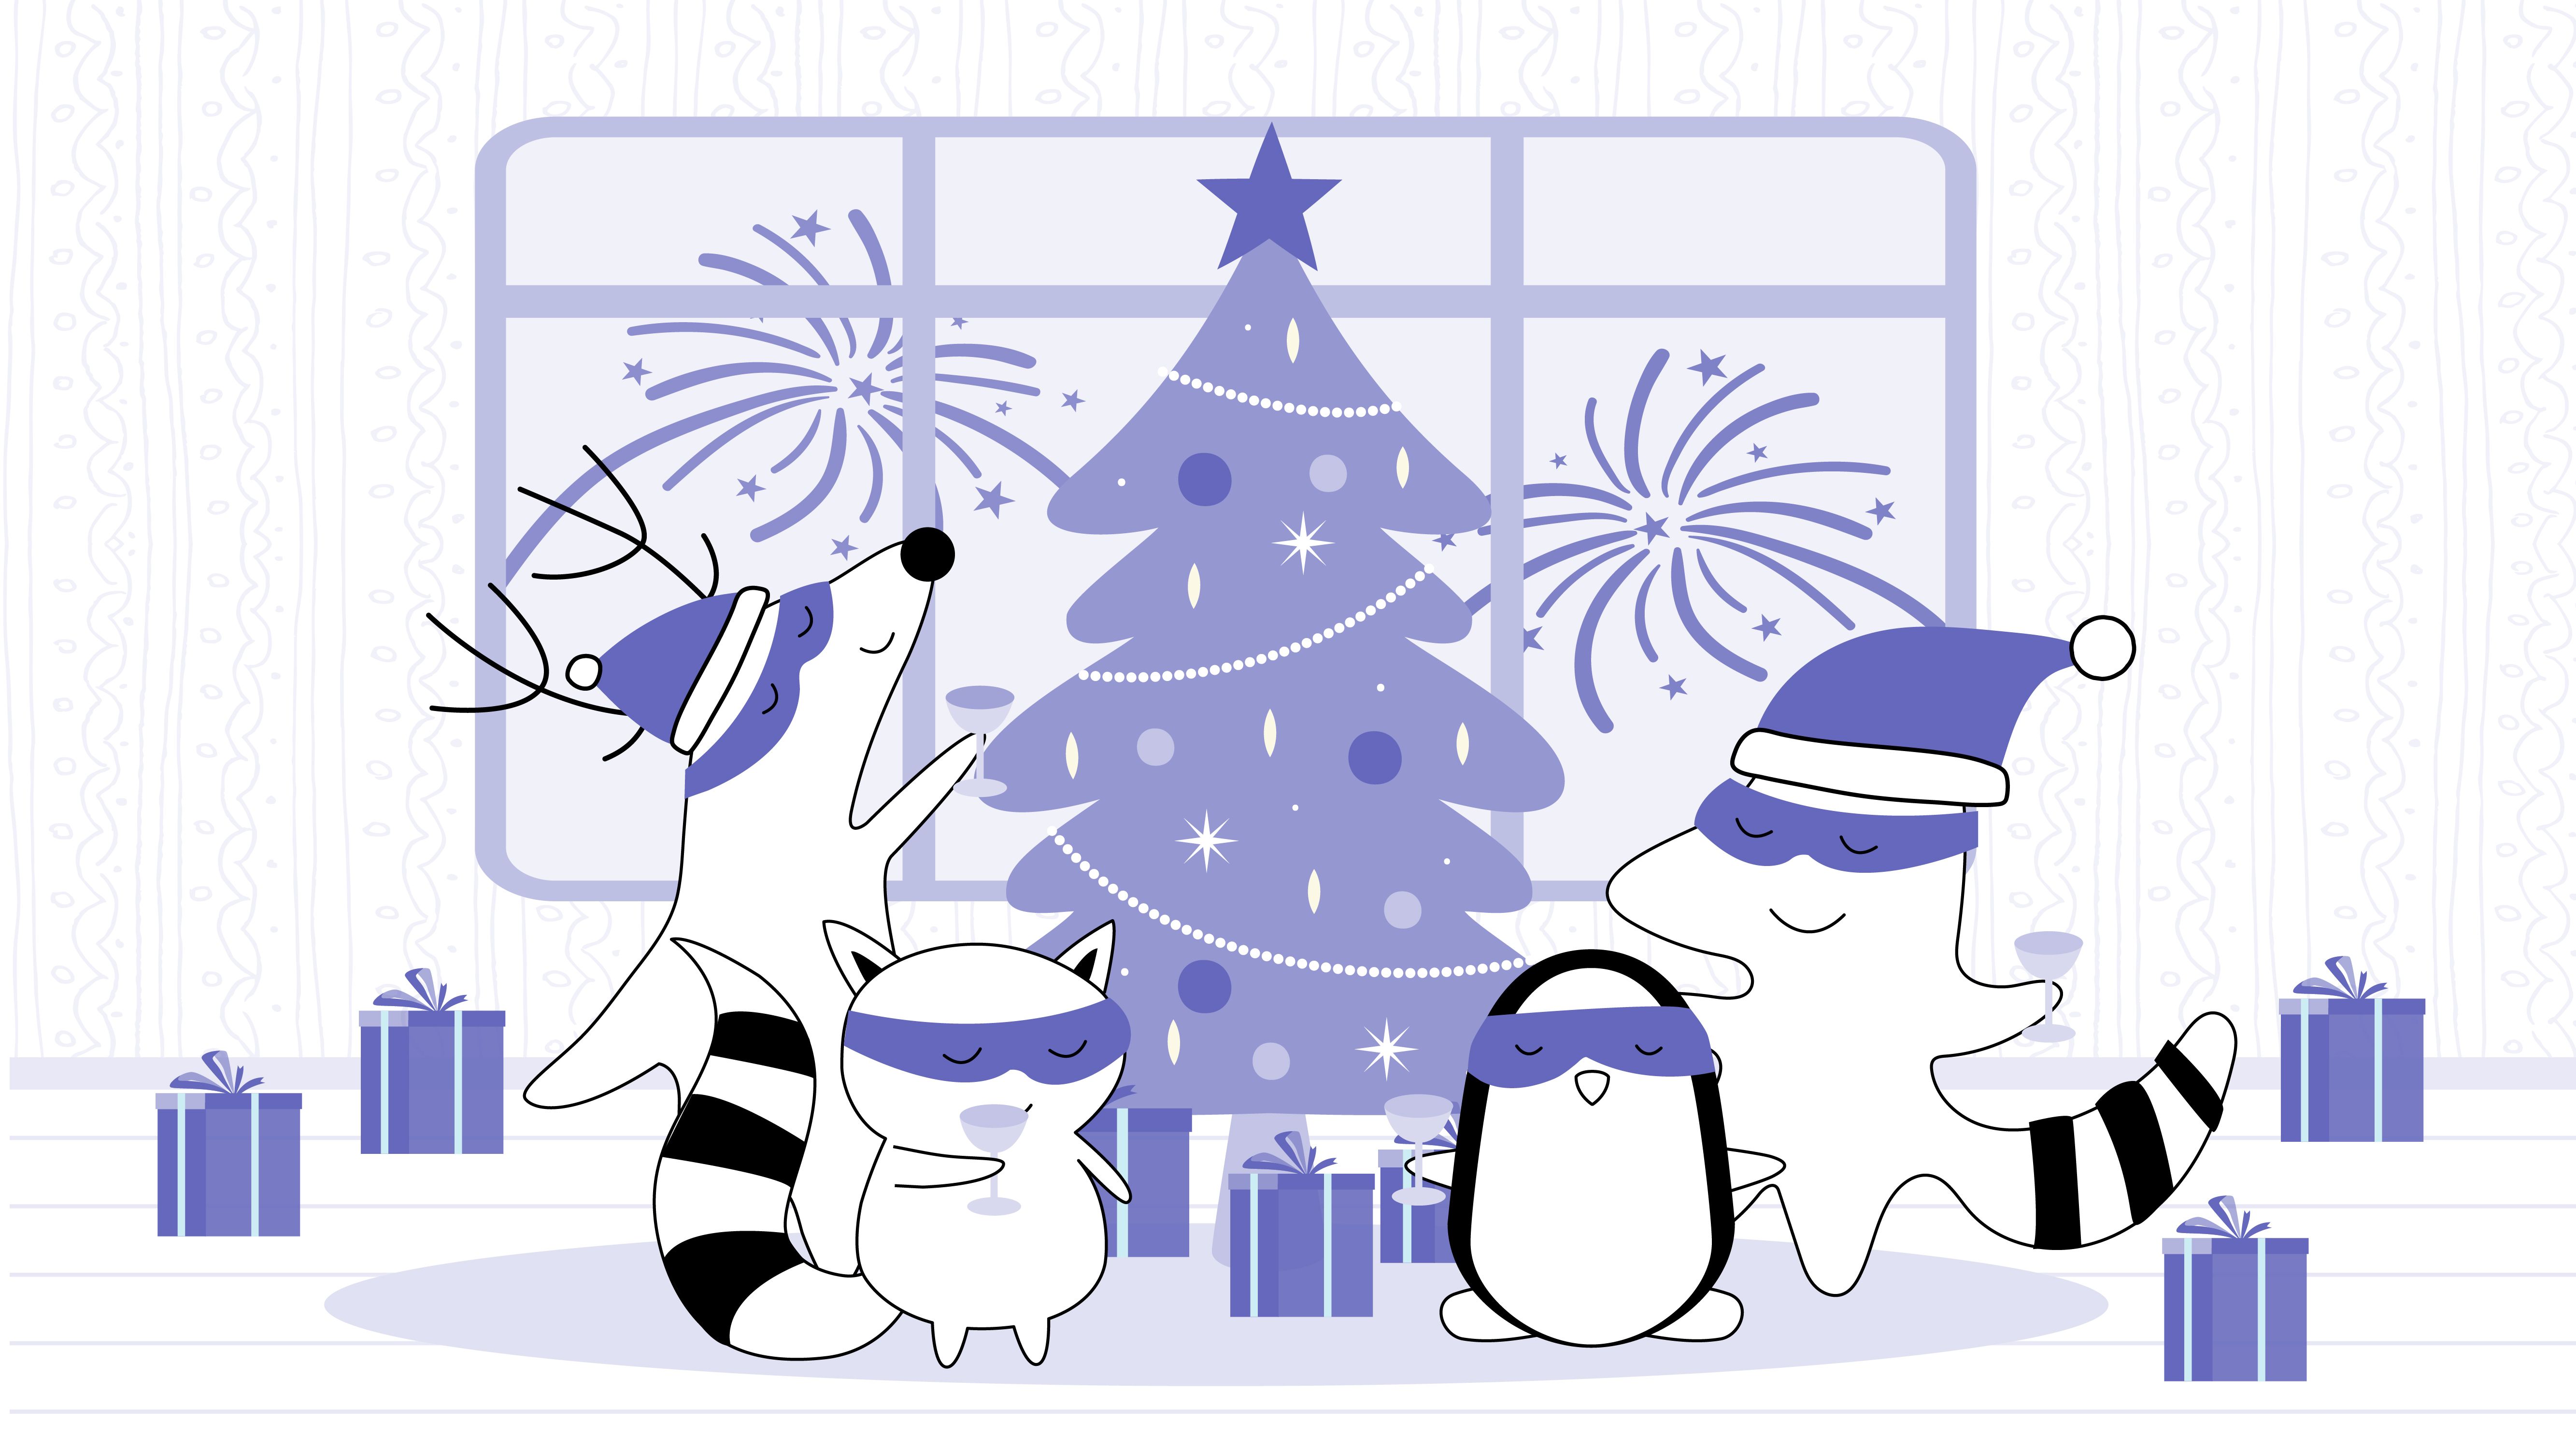 Soren, Benji, Iggy, and Pocky are are toasting to the New Year in front of a Christmas tree, with fireworks behind.